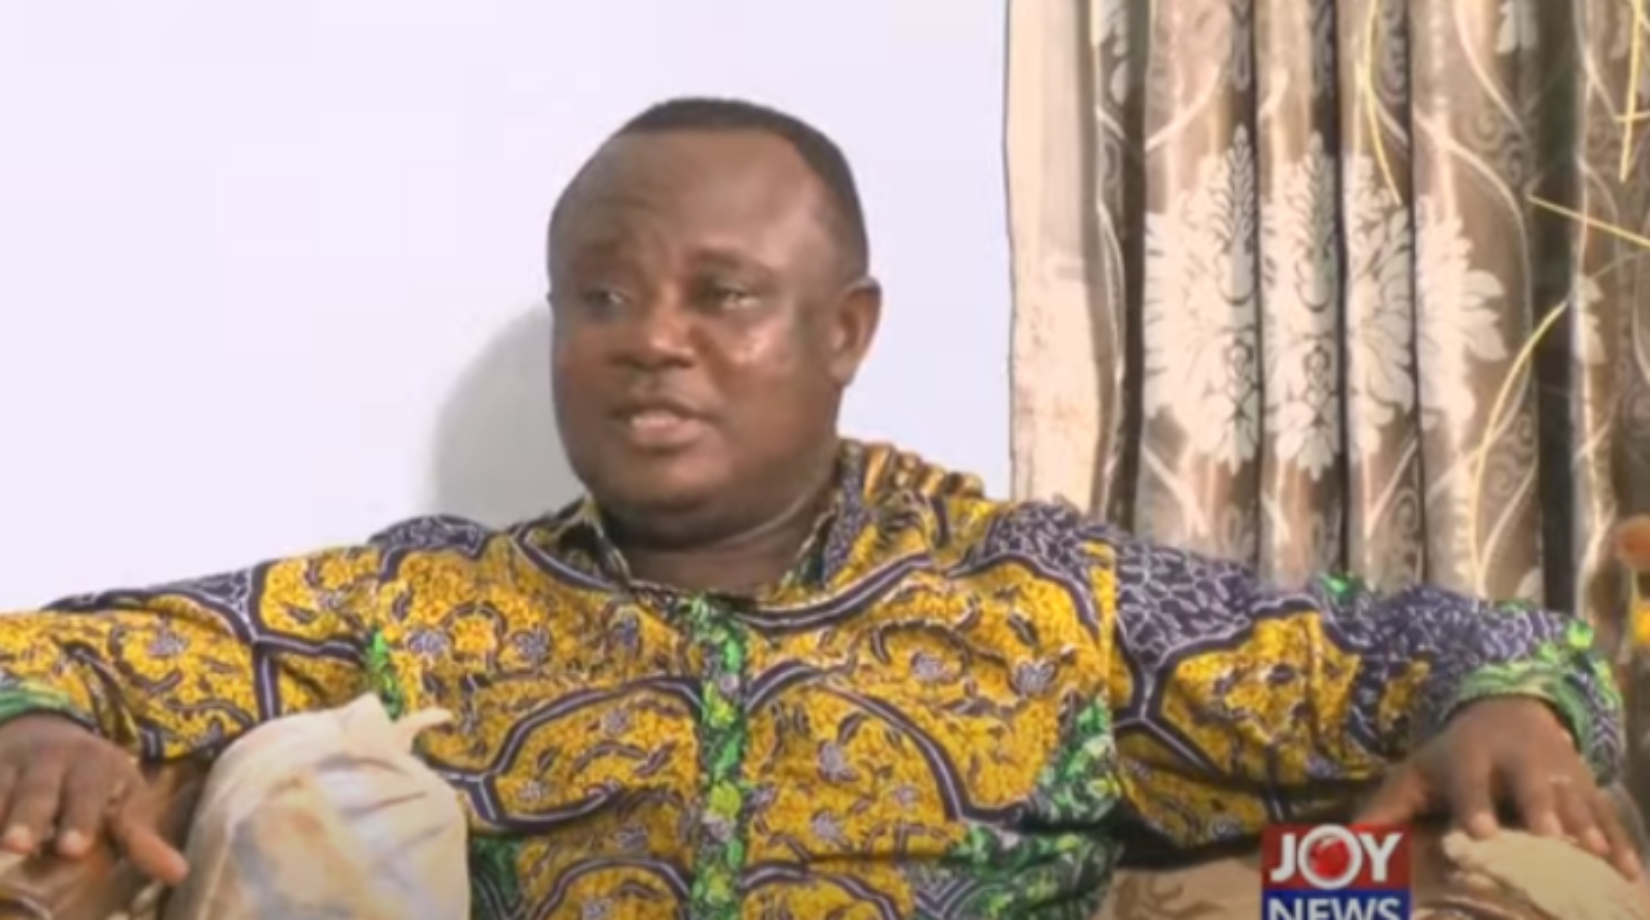 NPP has agreed for Bawumia’s running mate to come from Ashanti region-Bekwai MP reveals